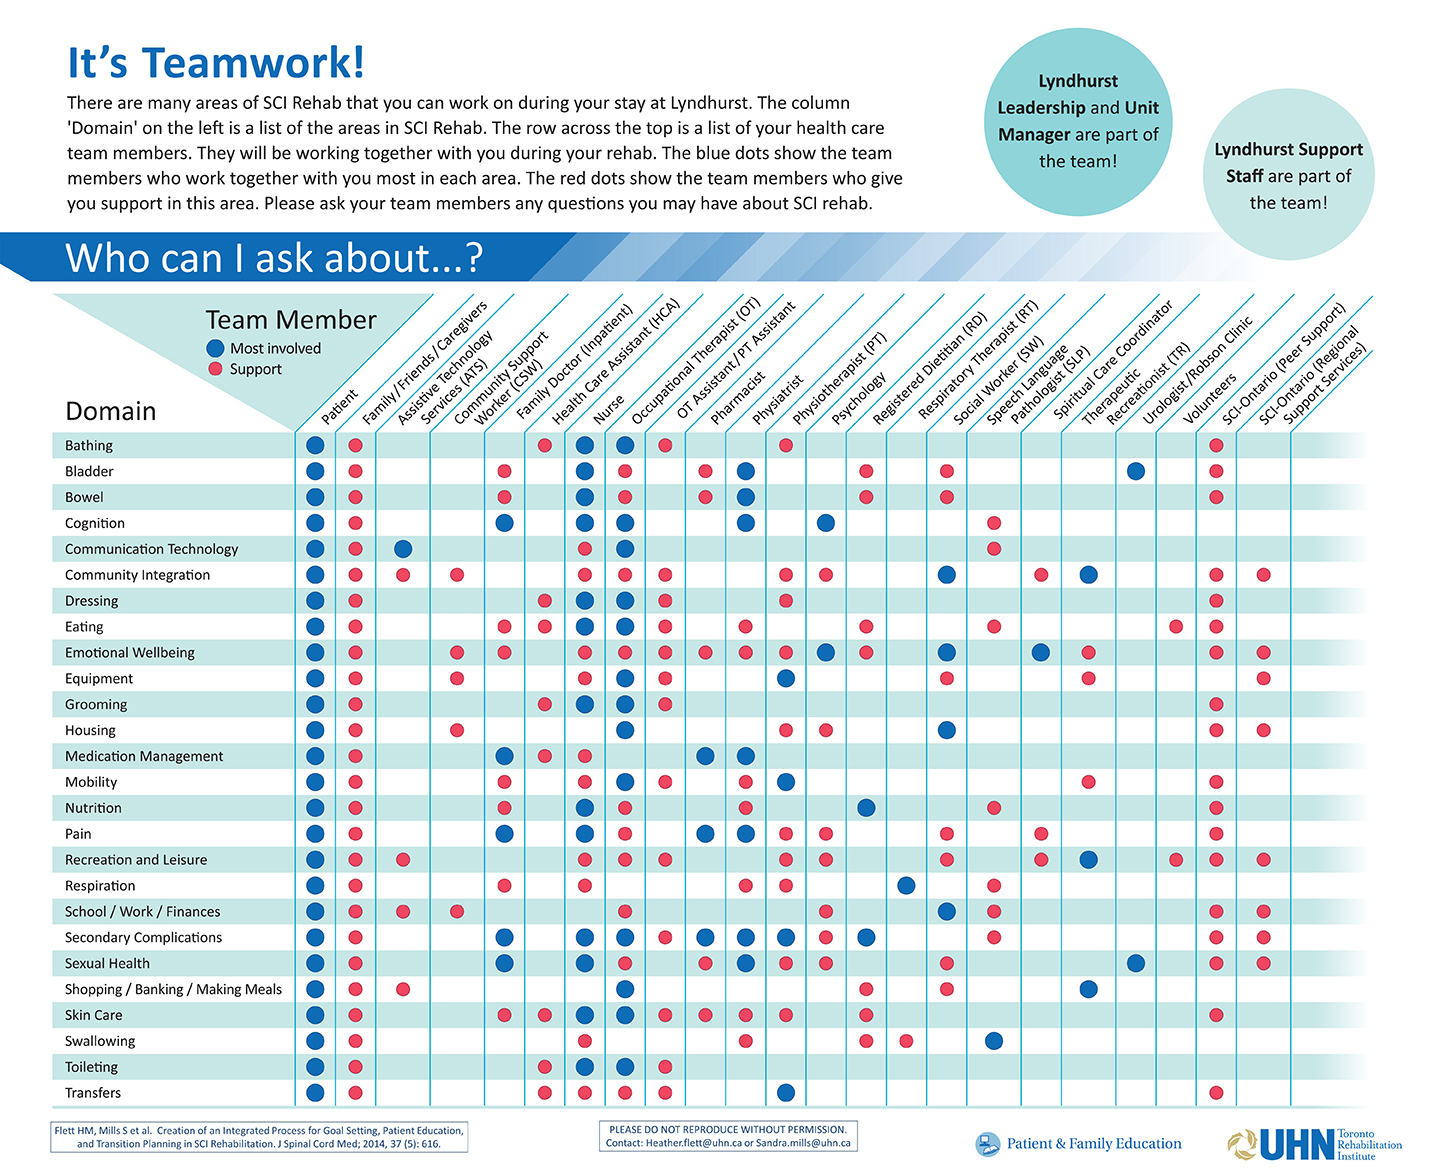 It's Teamwork Poster. This poster lists all of the areas that your spinal cord injury could affect and who is most involved in helping you with these domains. The blue and red dots indicate who is most involved and who can support you with these goals.